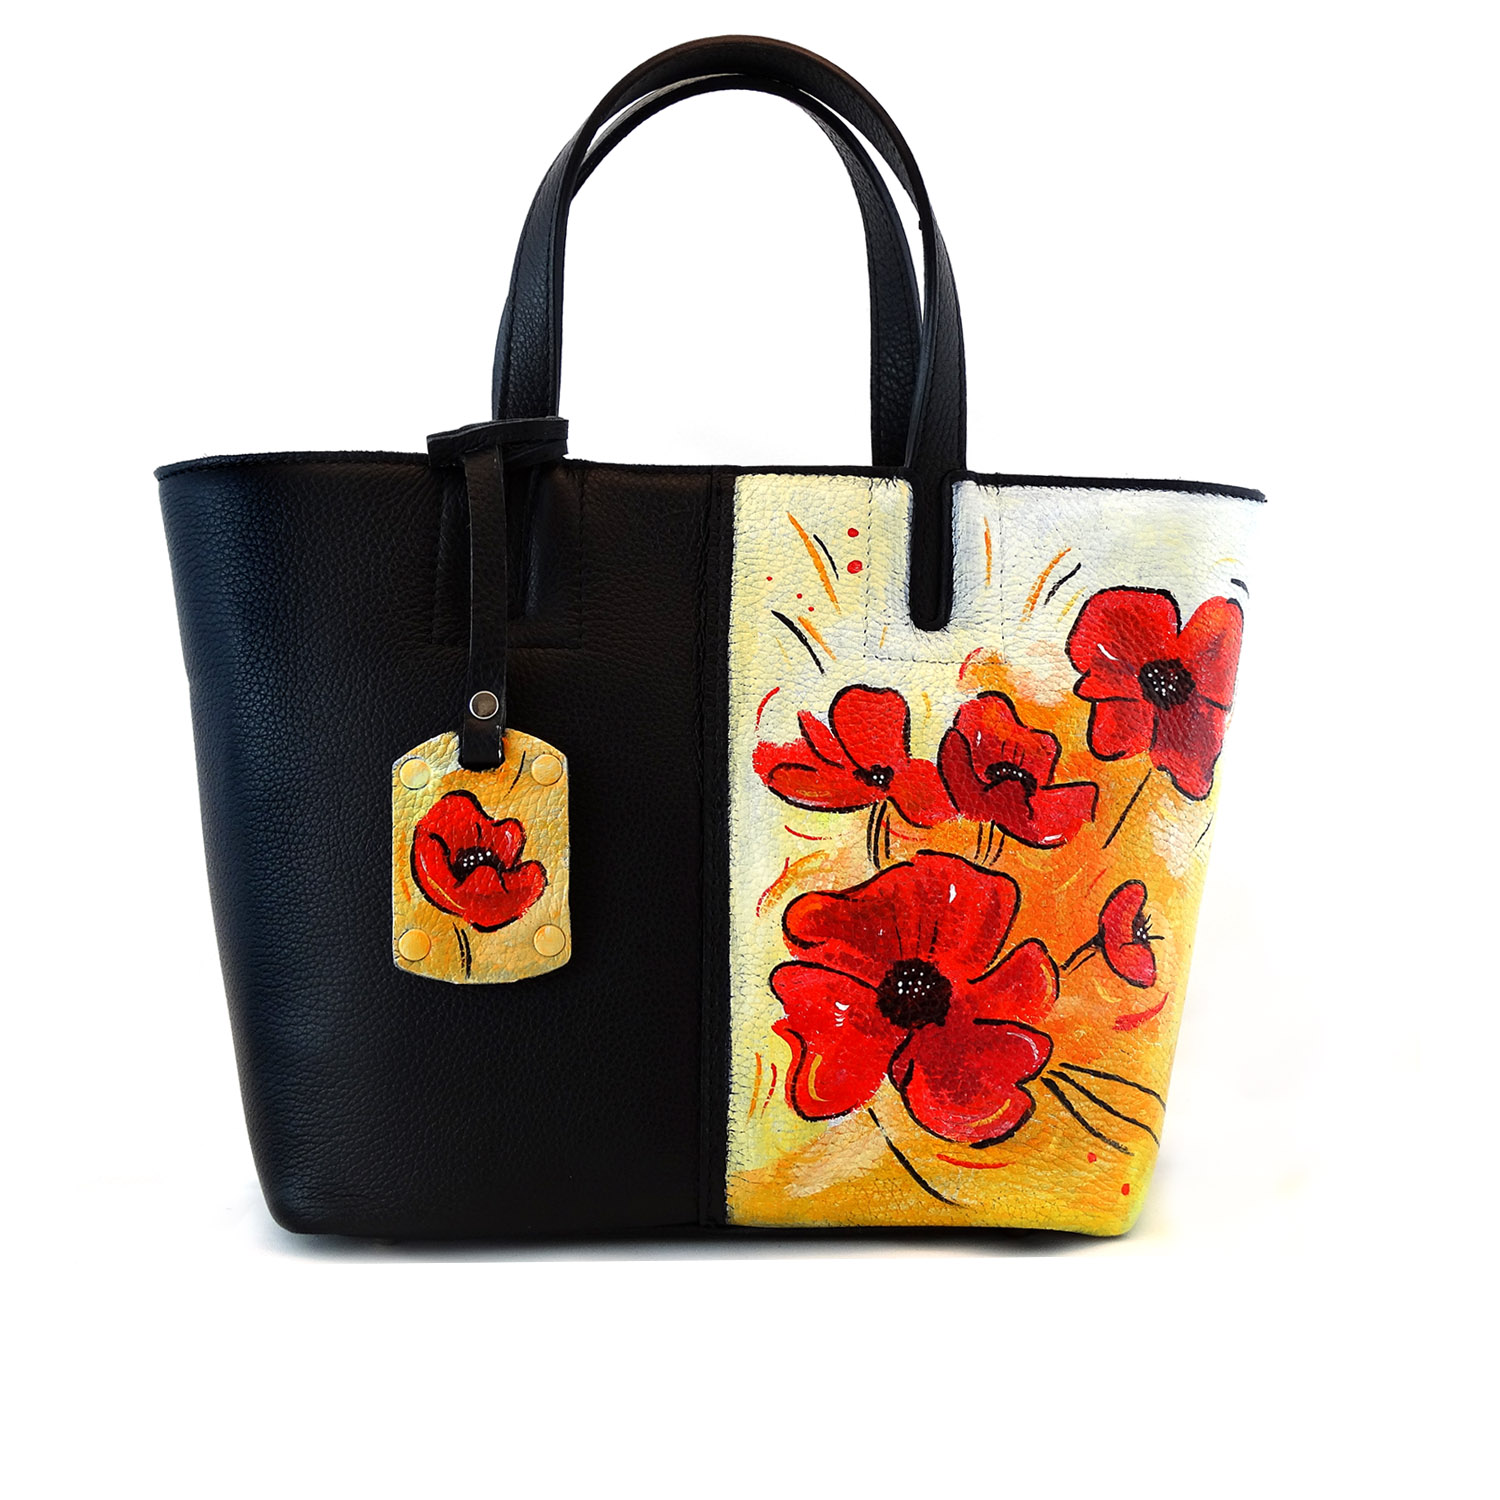 Hand painted bag - Poppies